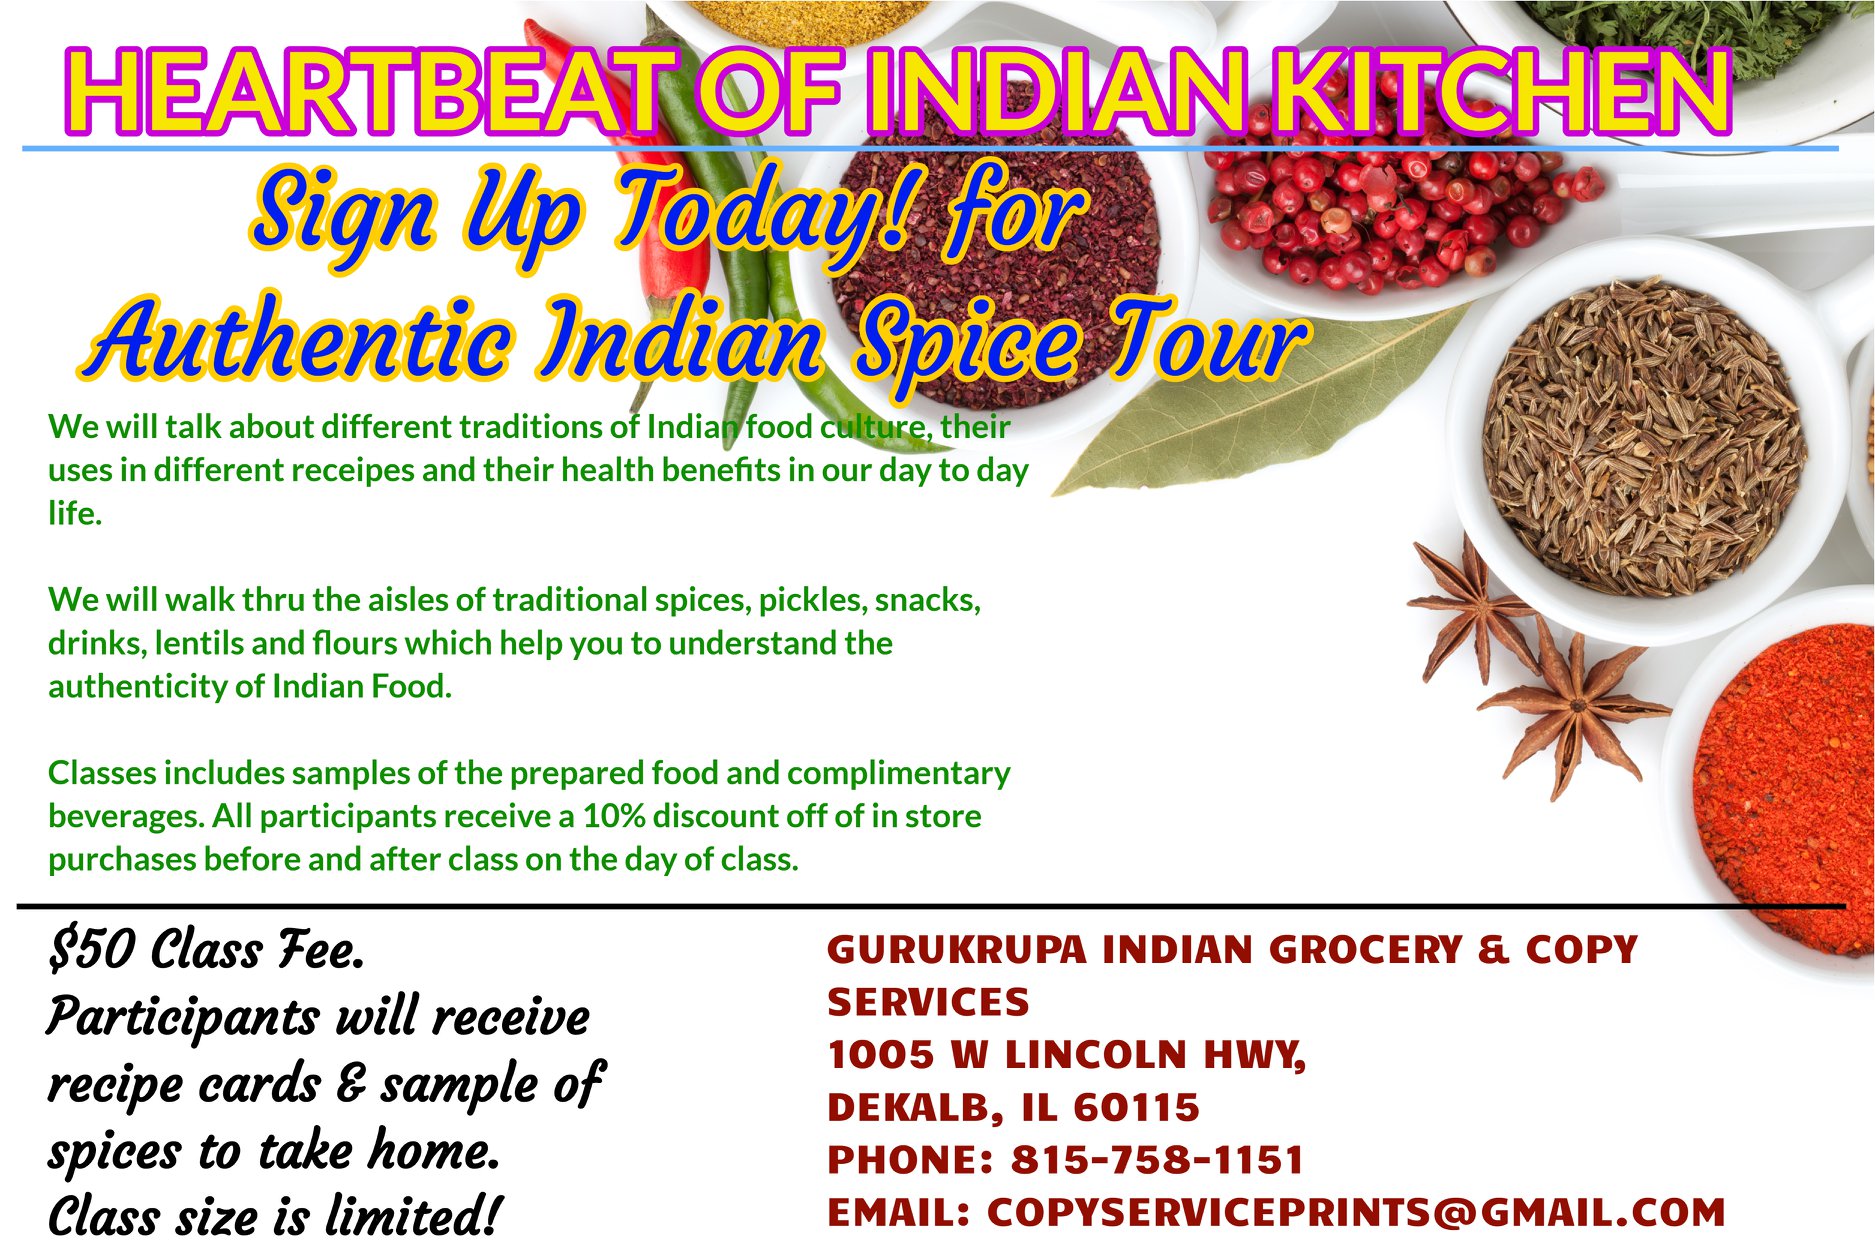 Sign Up for Authentic Indian Spice Tour!